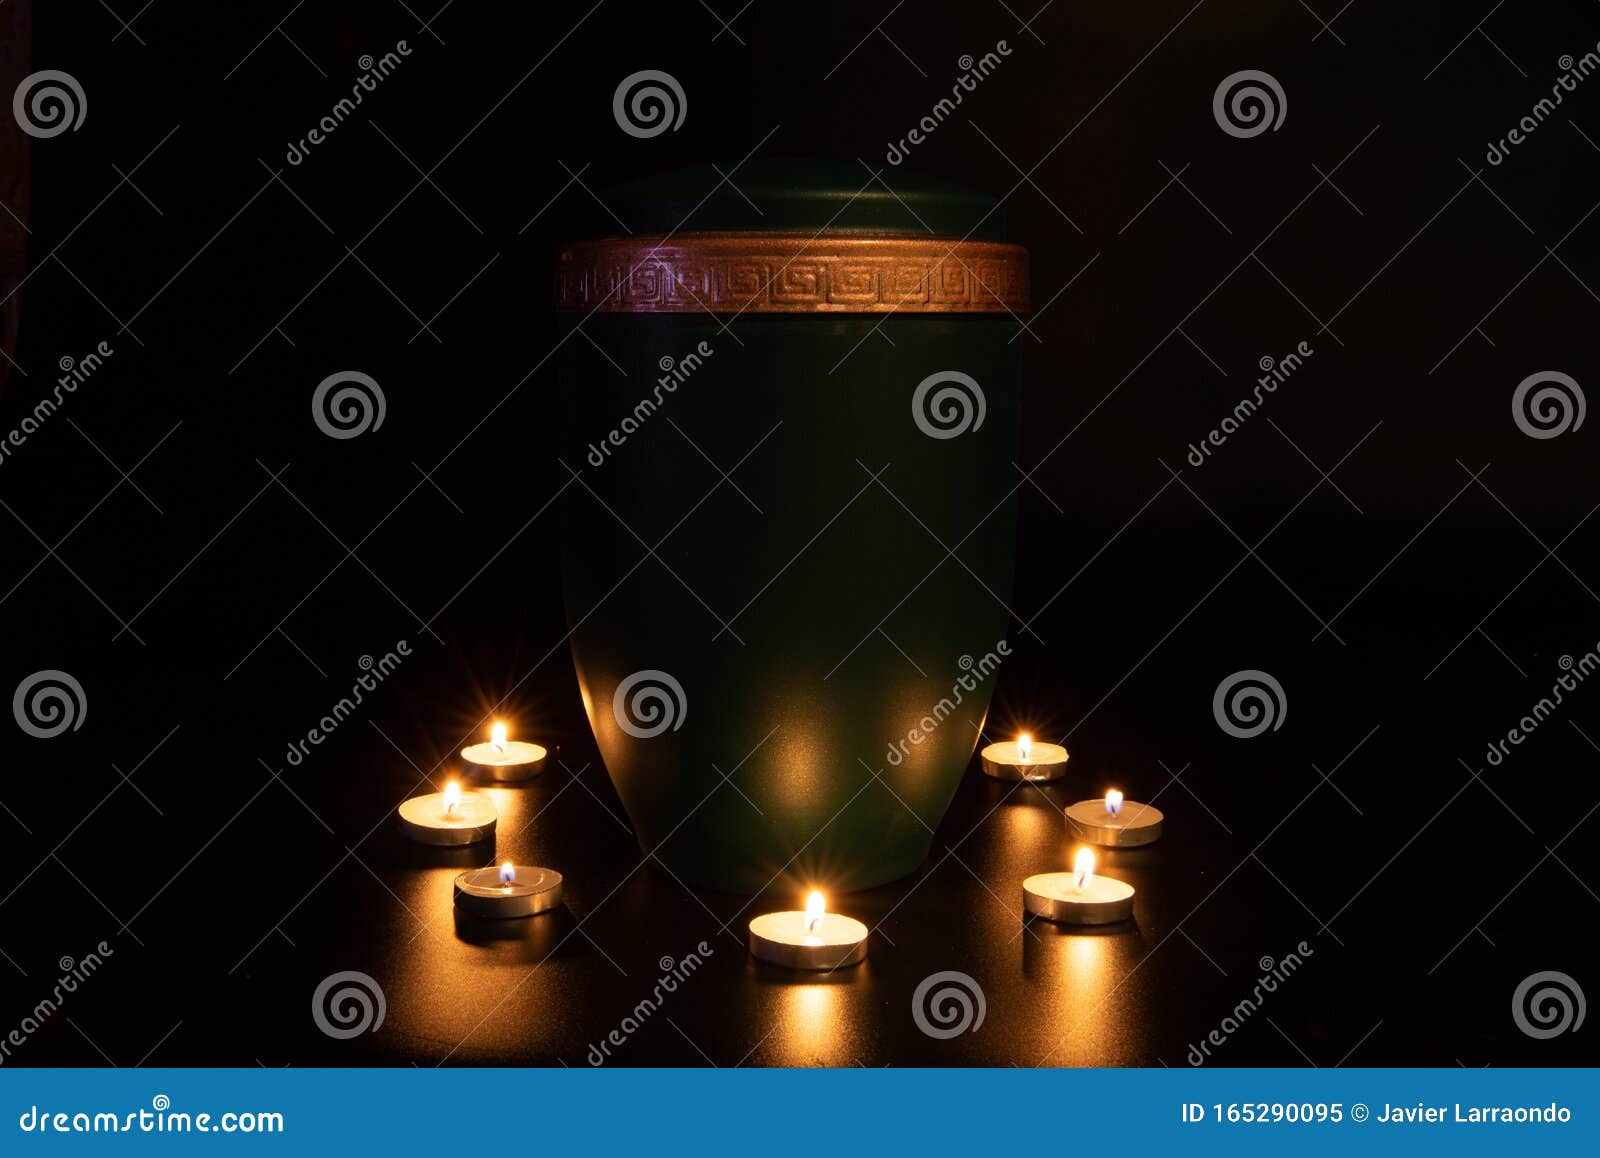 green urna with golden edge surrounded with small burning candles